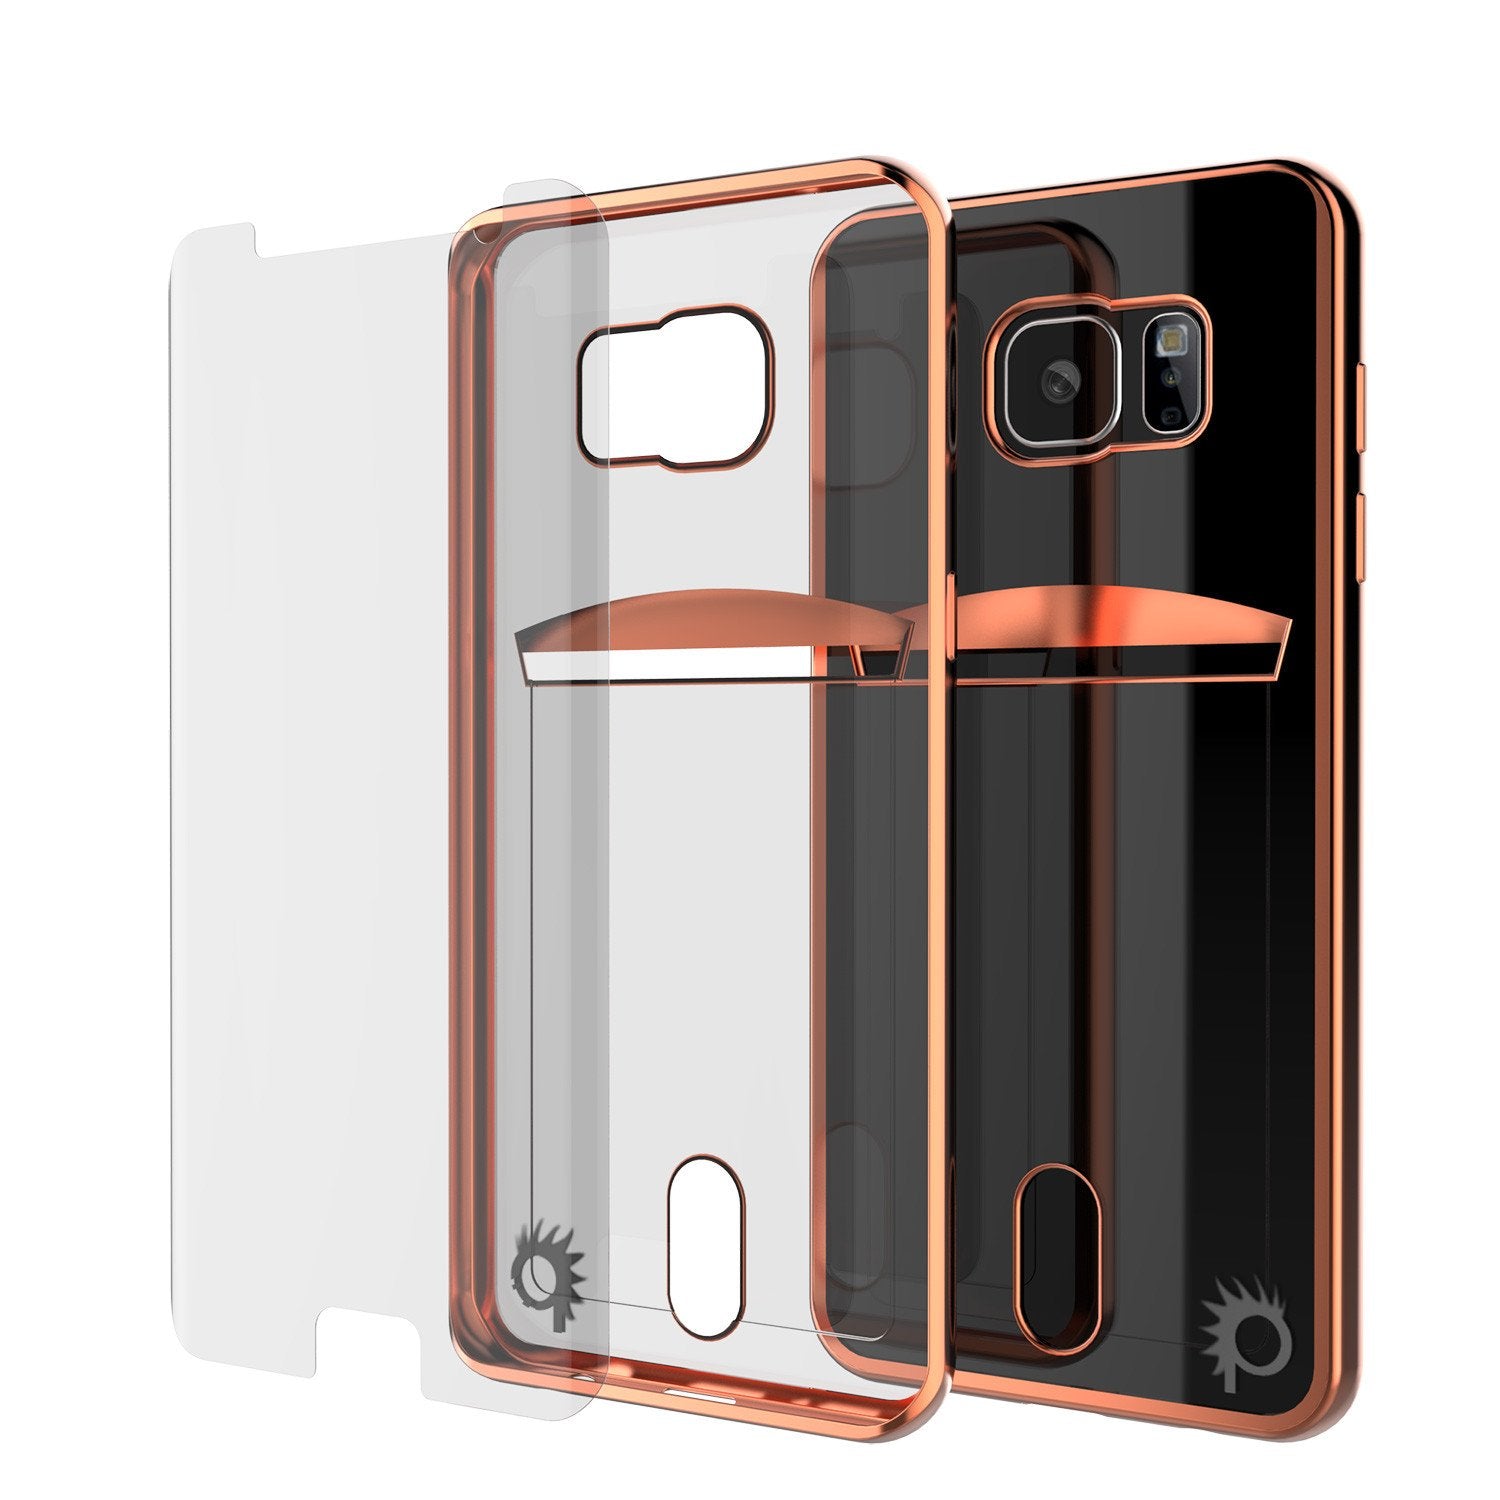 Galaxy S6 EDGE+ Plus Case, PUNKCASE® LUCID Rose Gold Series | Card Slot | SHIELD Screen Protector